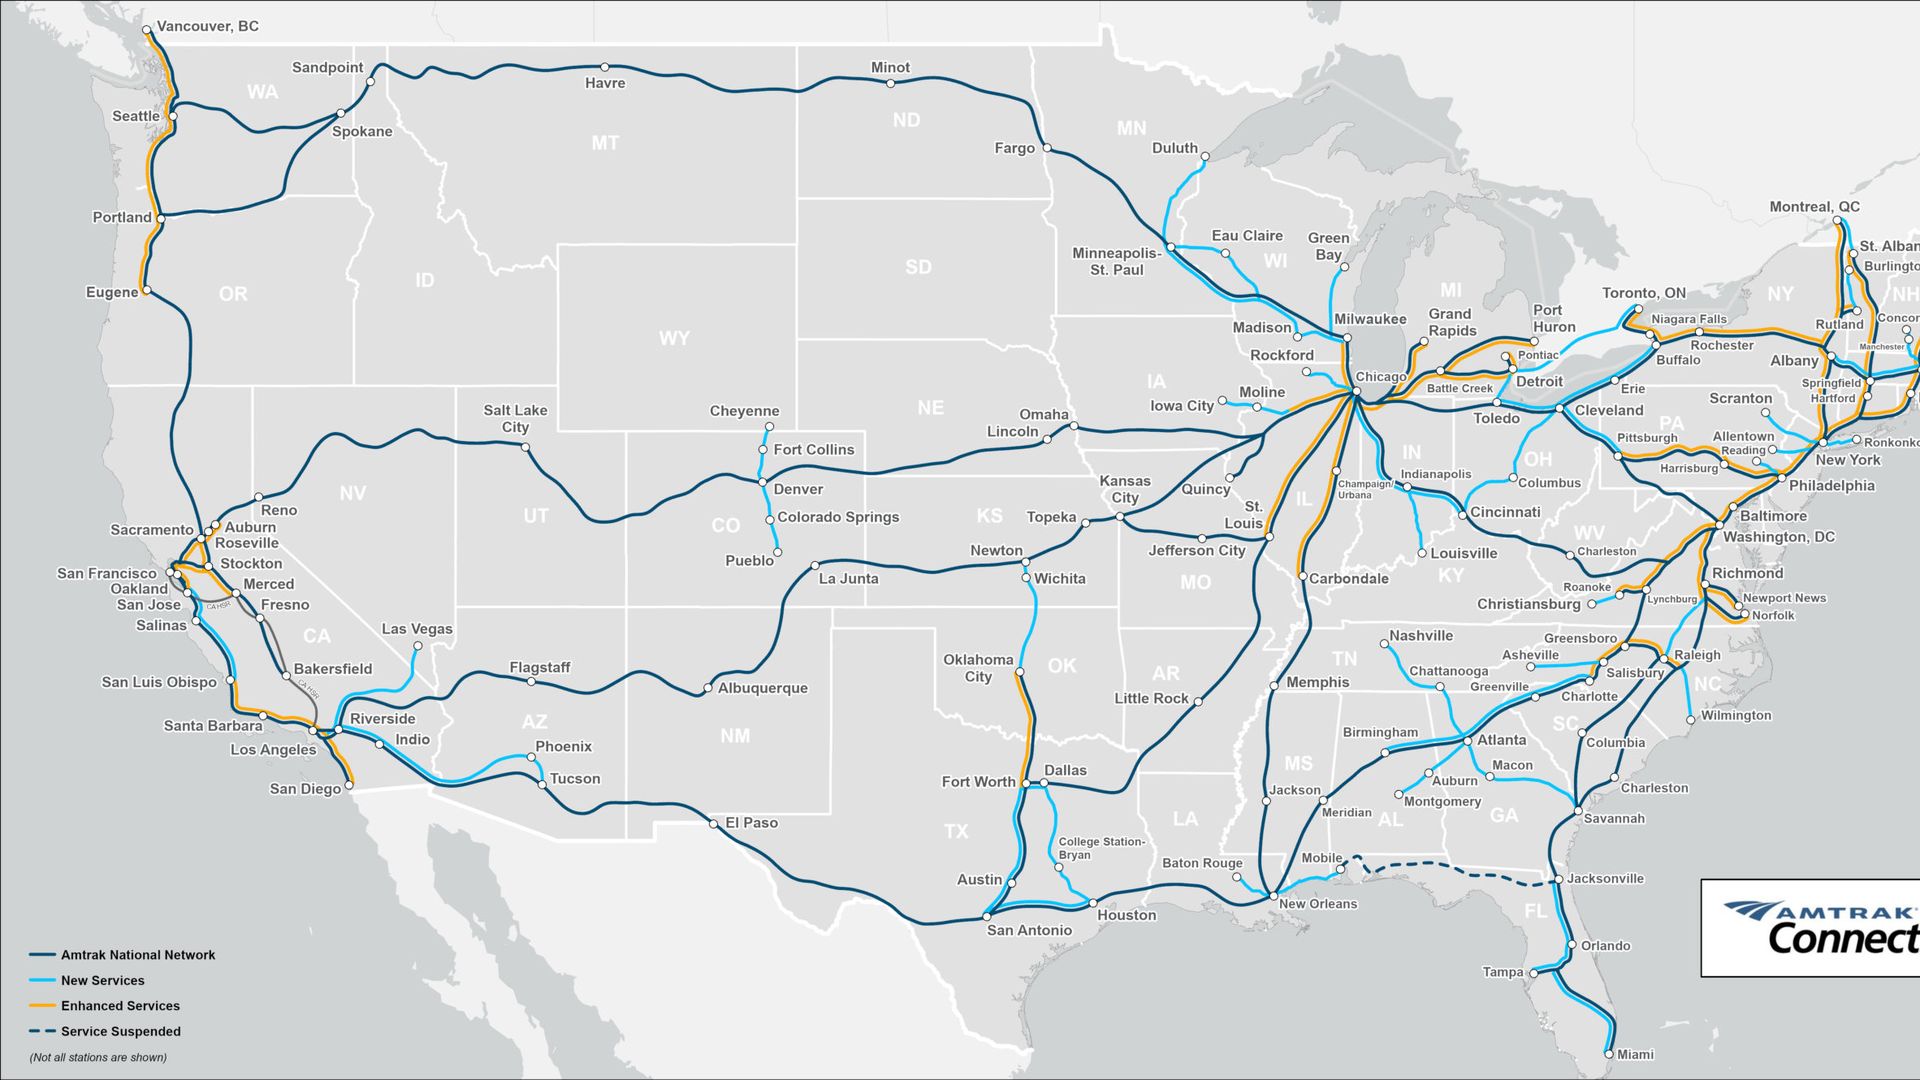 The proposed map for an expanded rail service by Amtrak. 